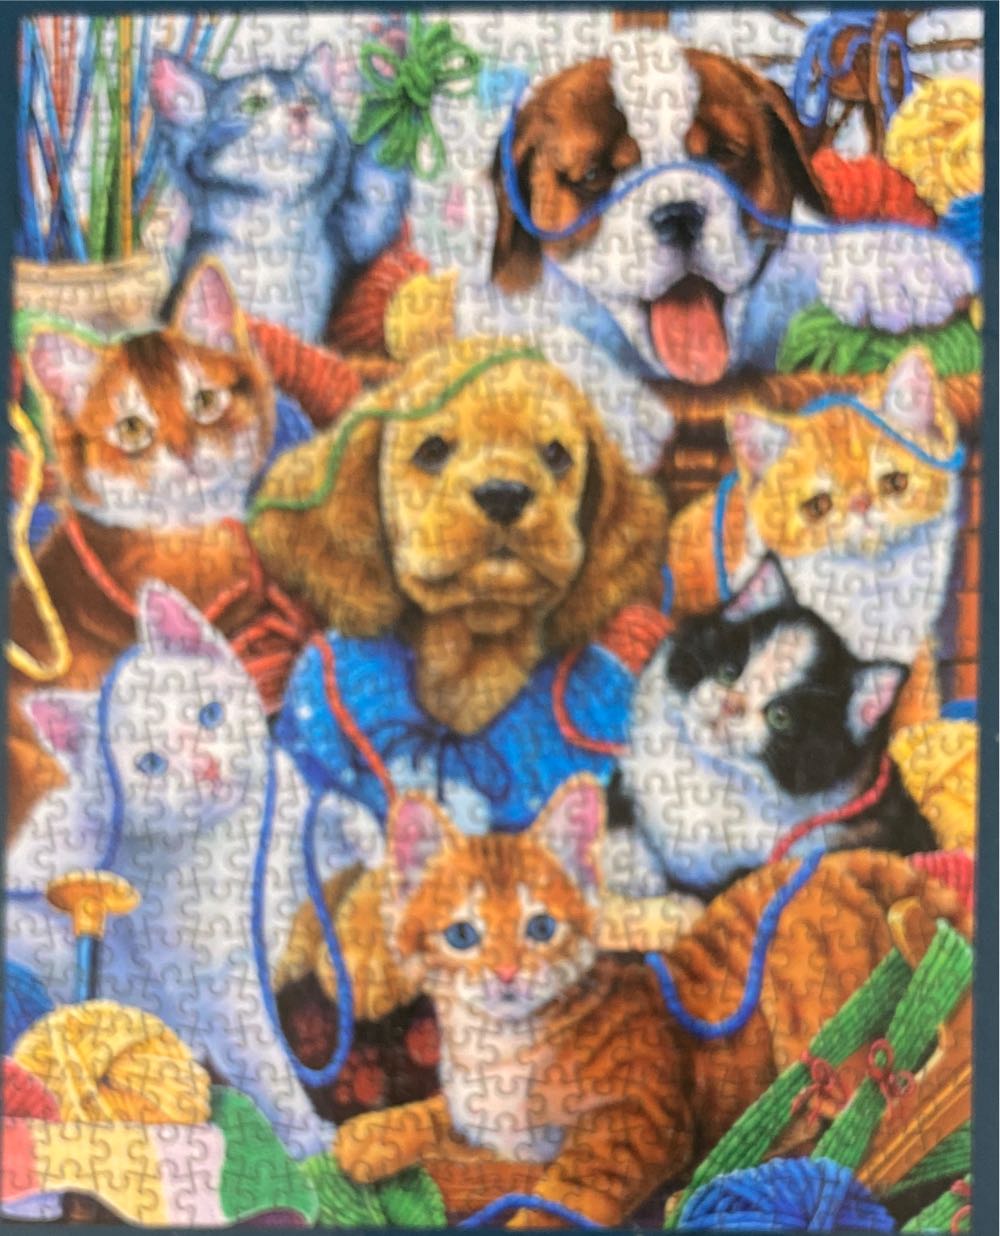 Kittens And Pups - Cardinal puzzle collectible - Main Image 1